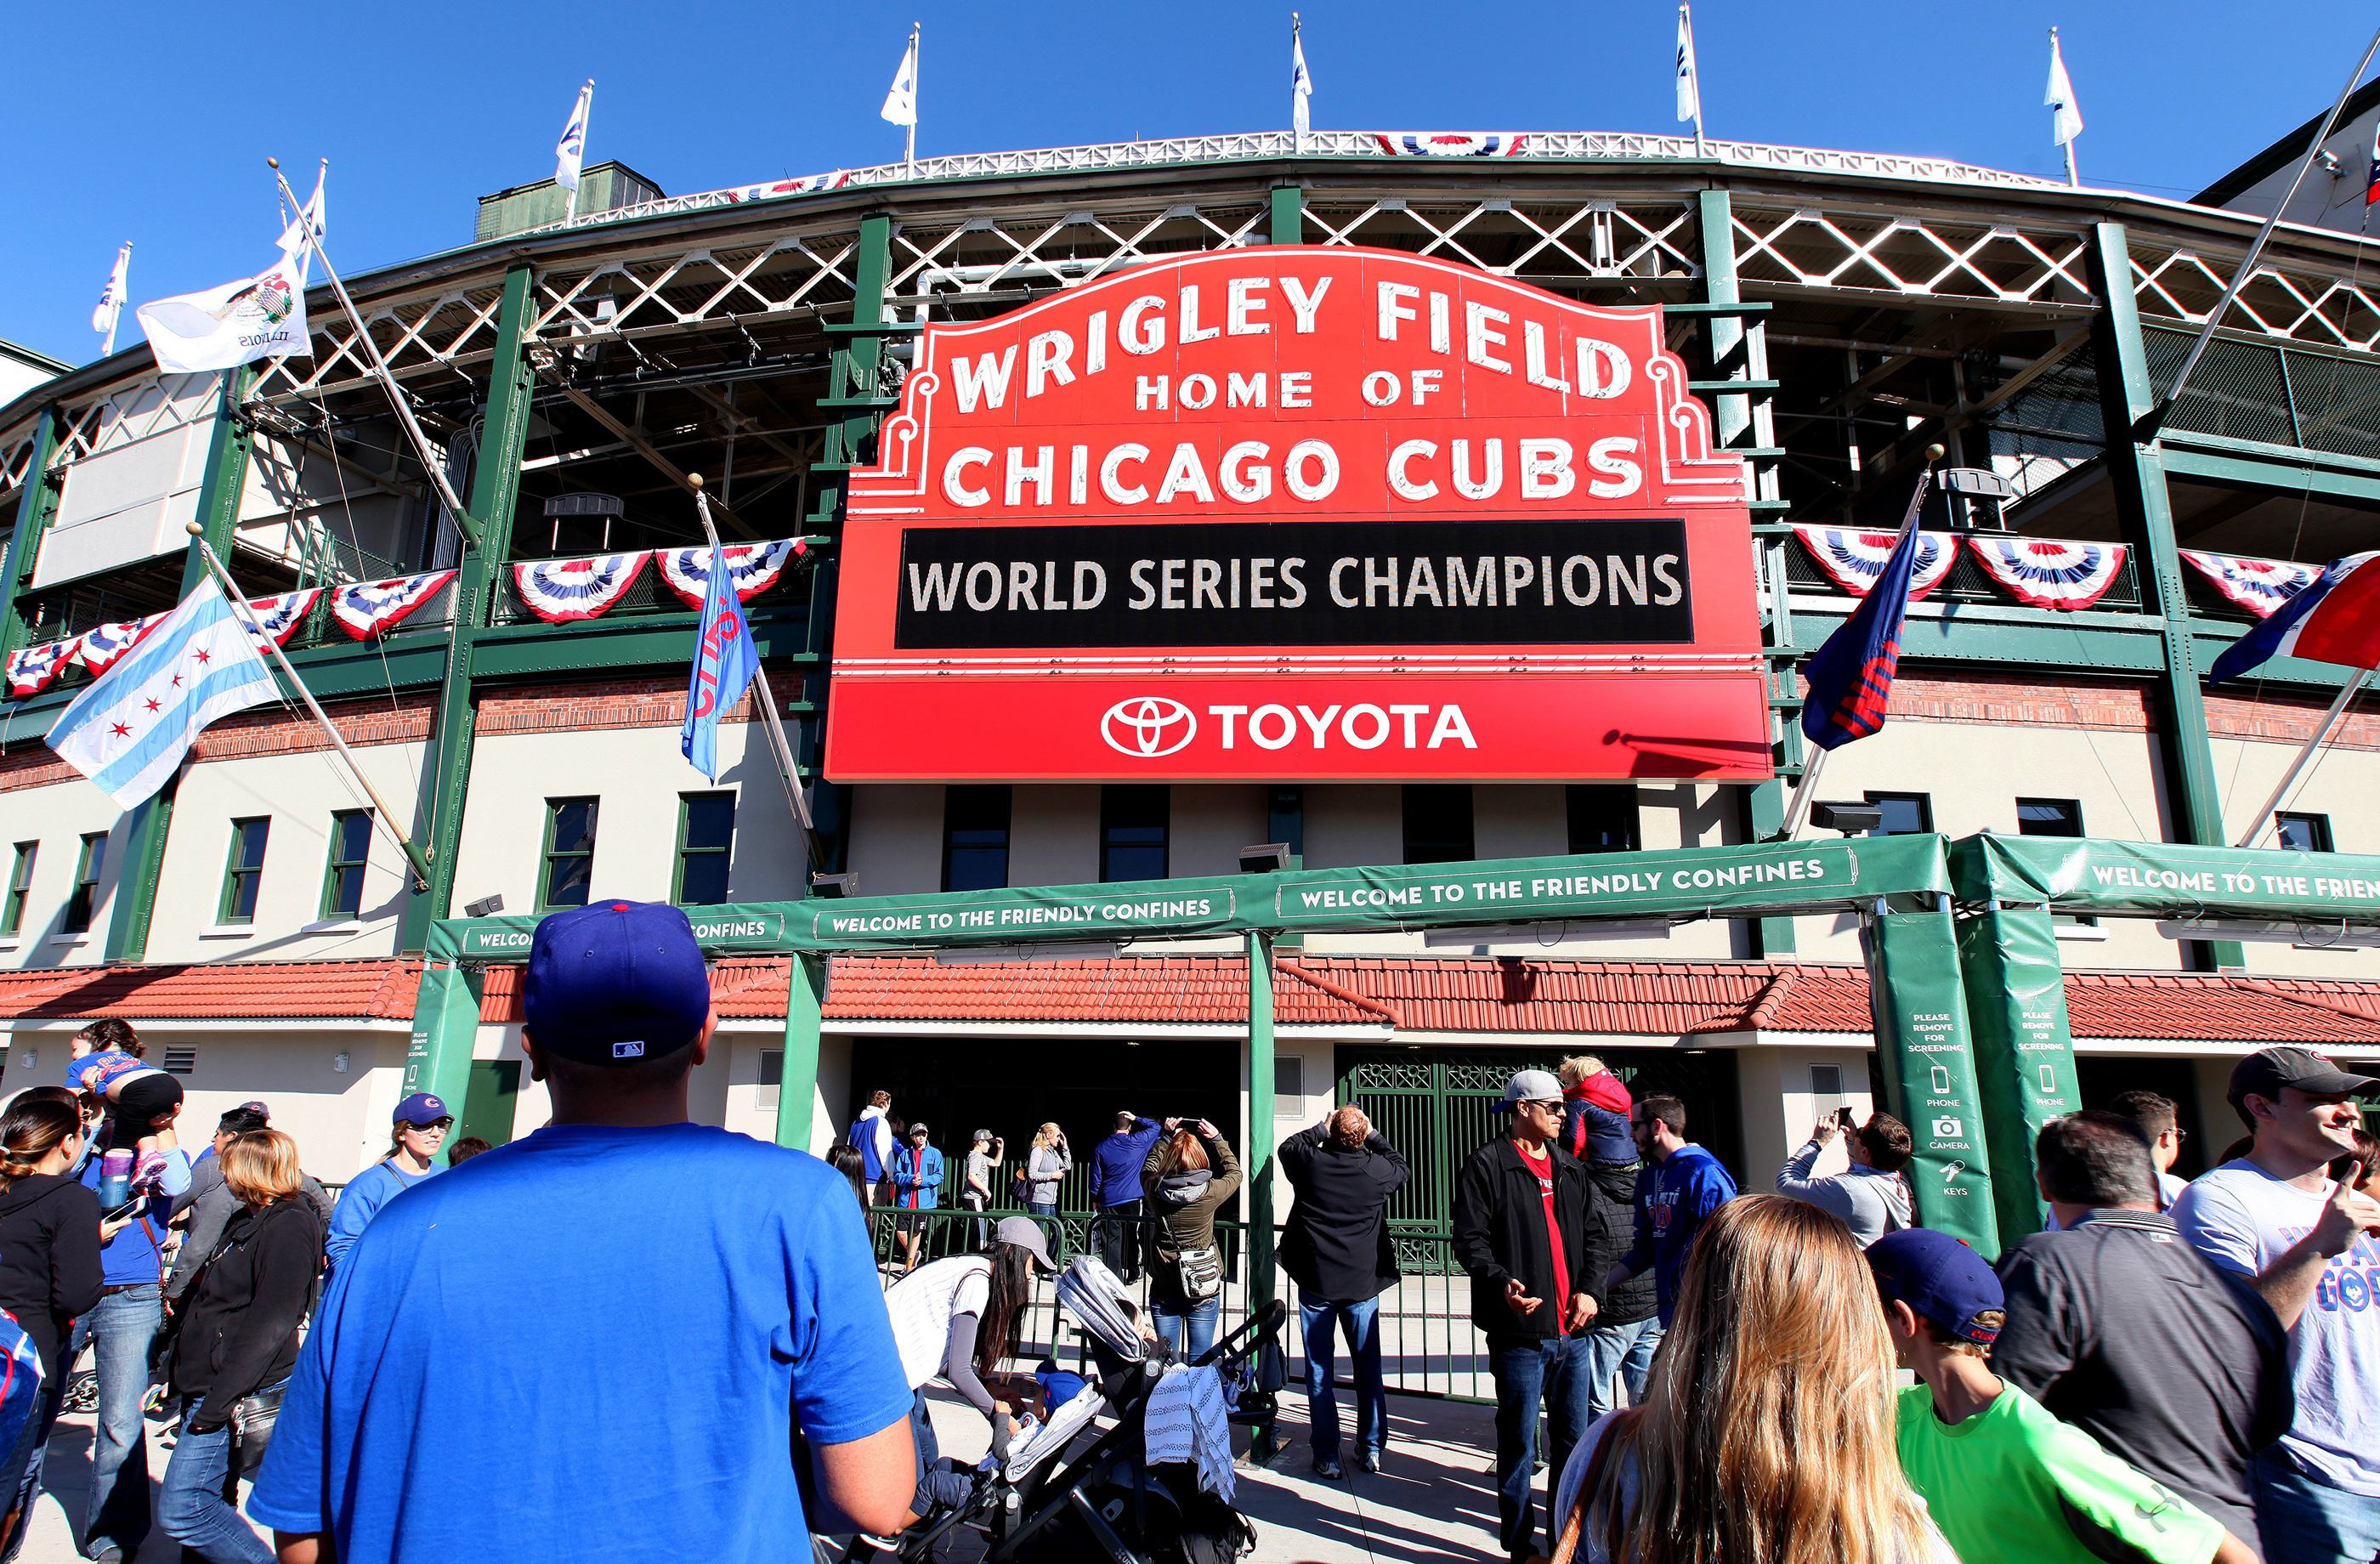 170815-route-66-wrigley-field-chicago